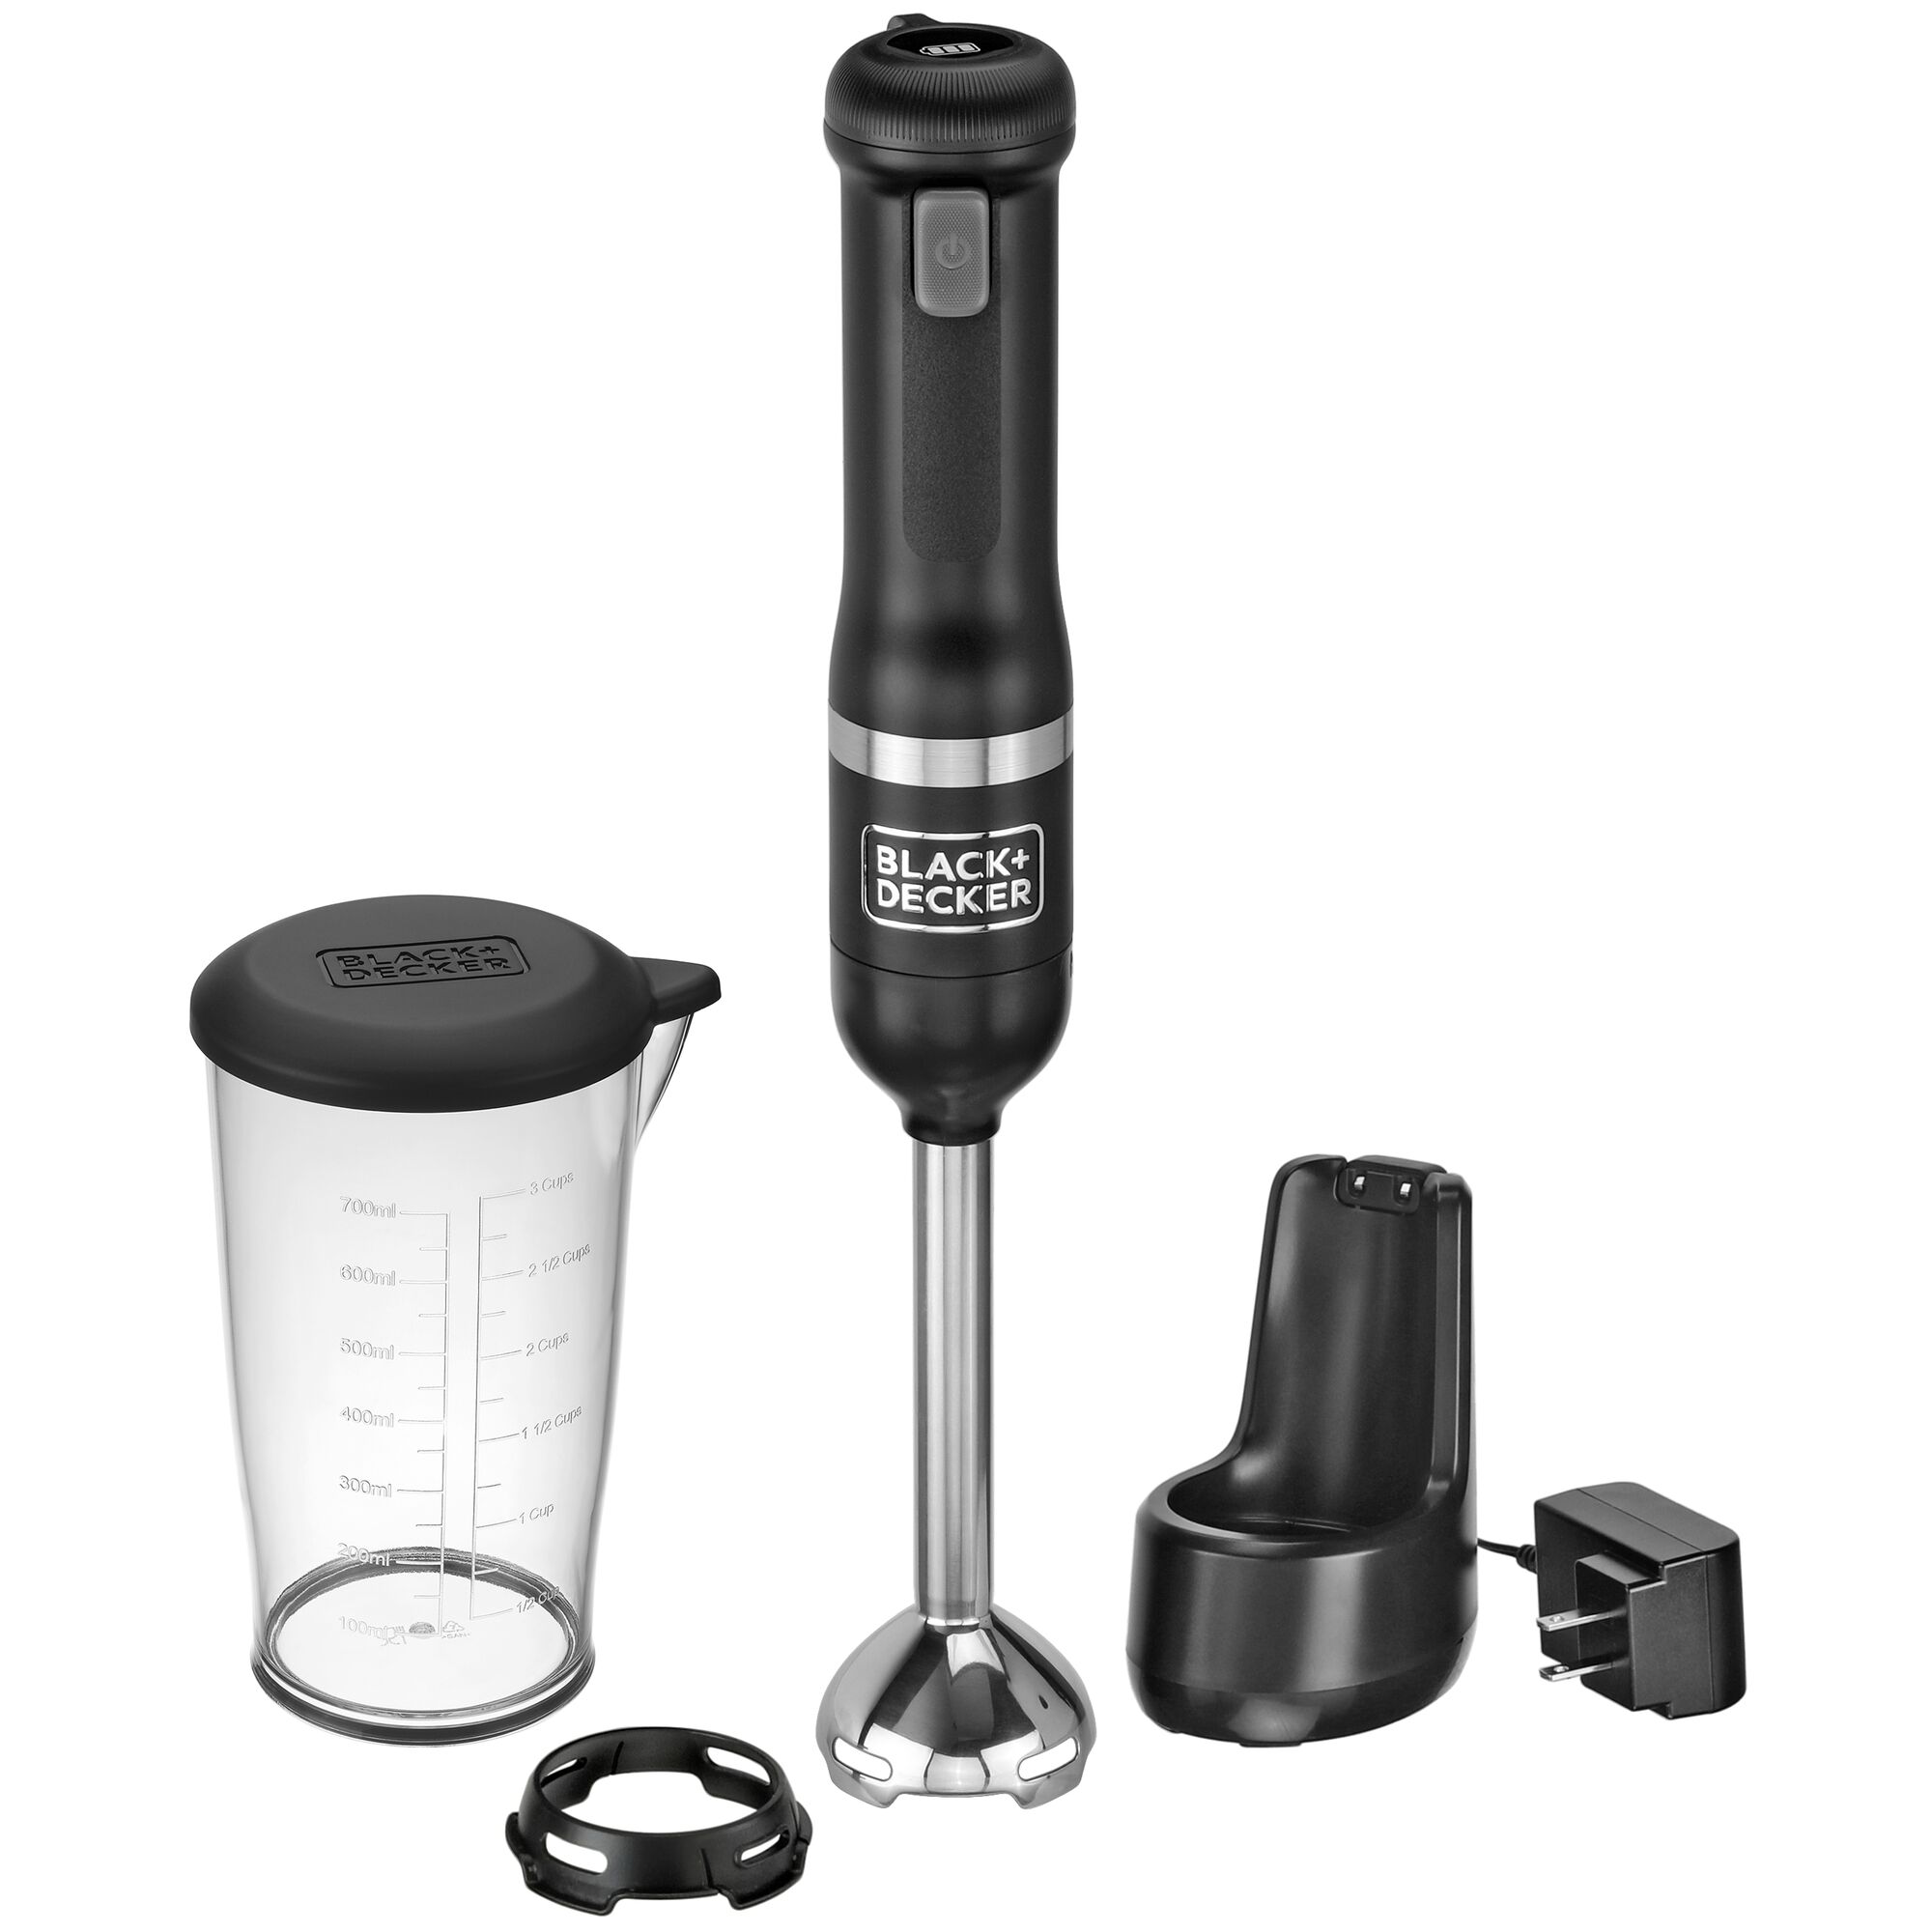 Front view of BLACK+DECKER kitchen wand Cordless Immersion Blender kit in black